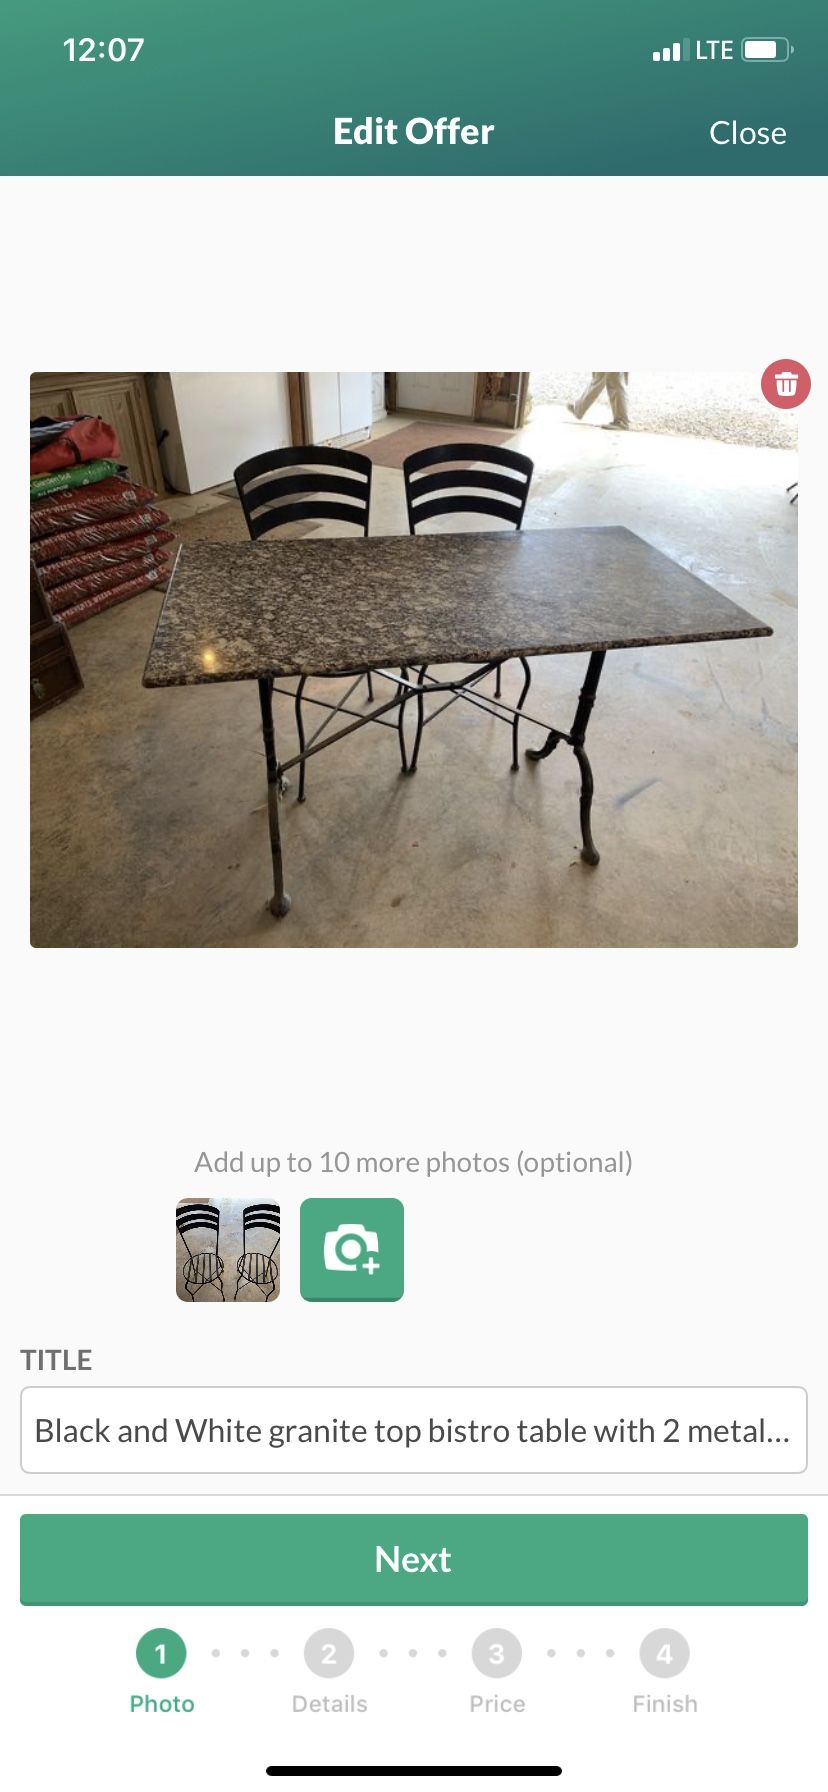 Solid iron and granite bistro table with 2 chairs